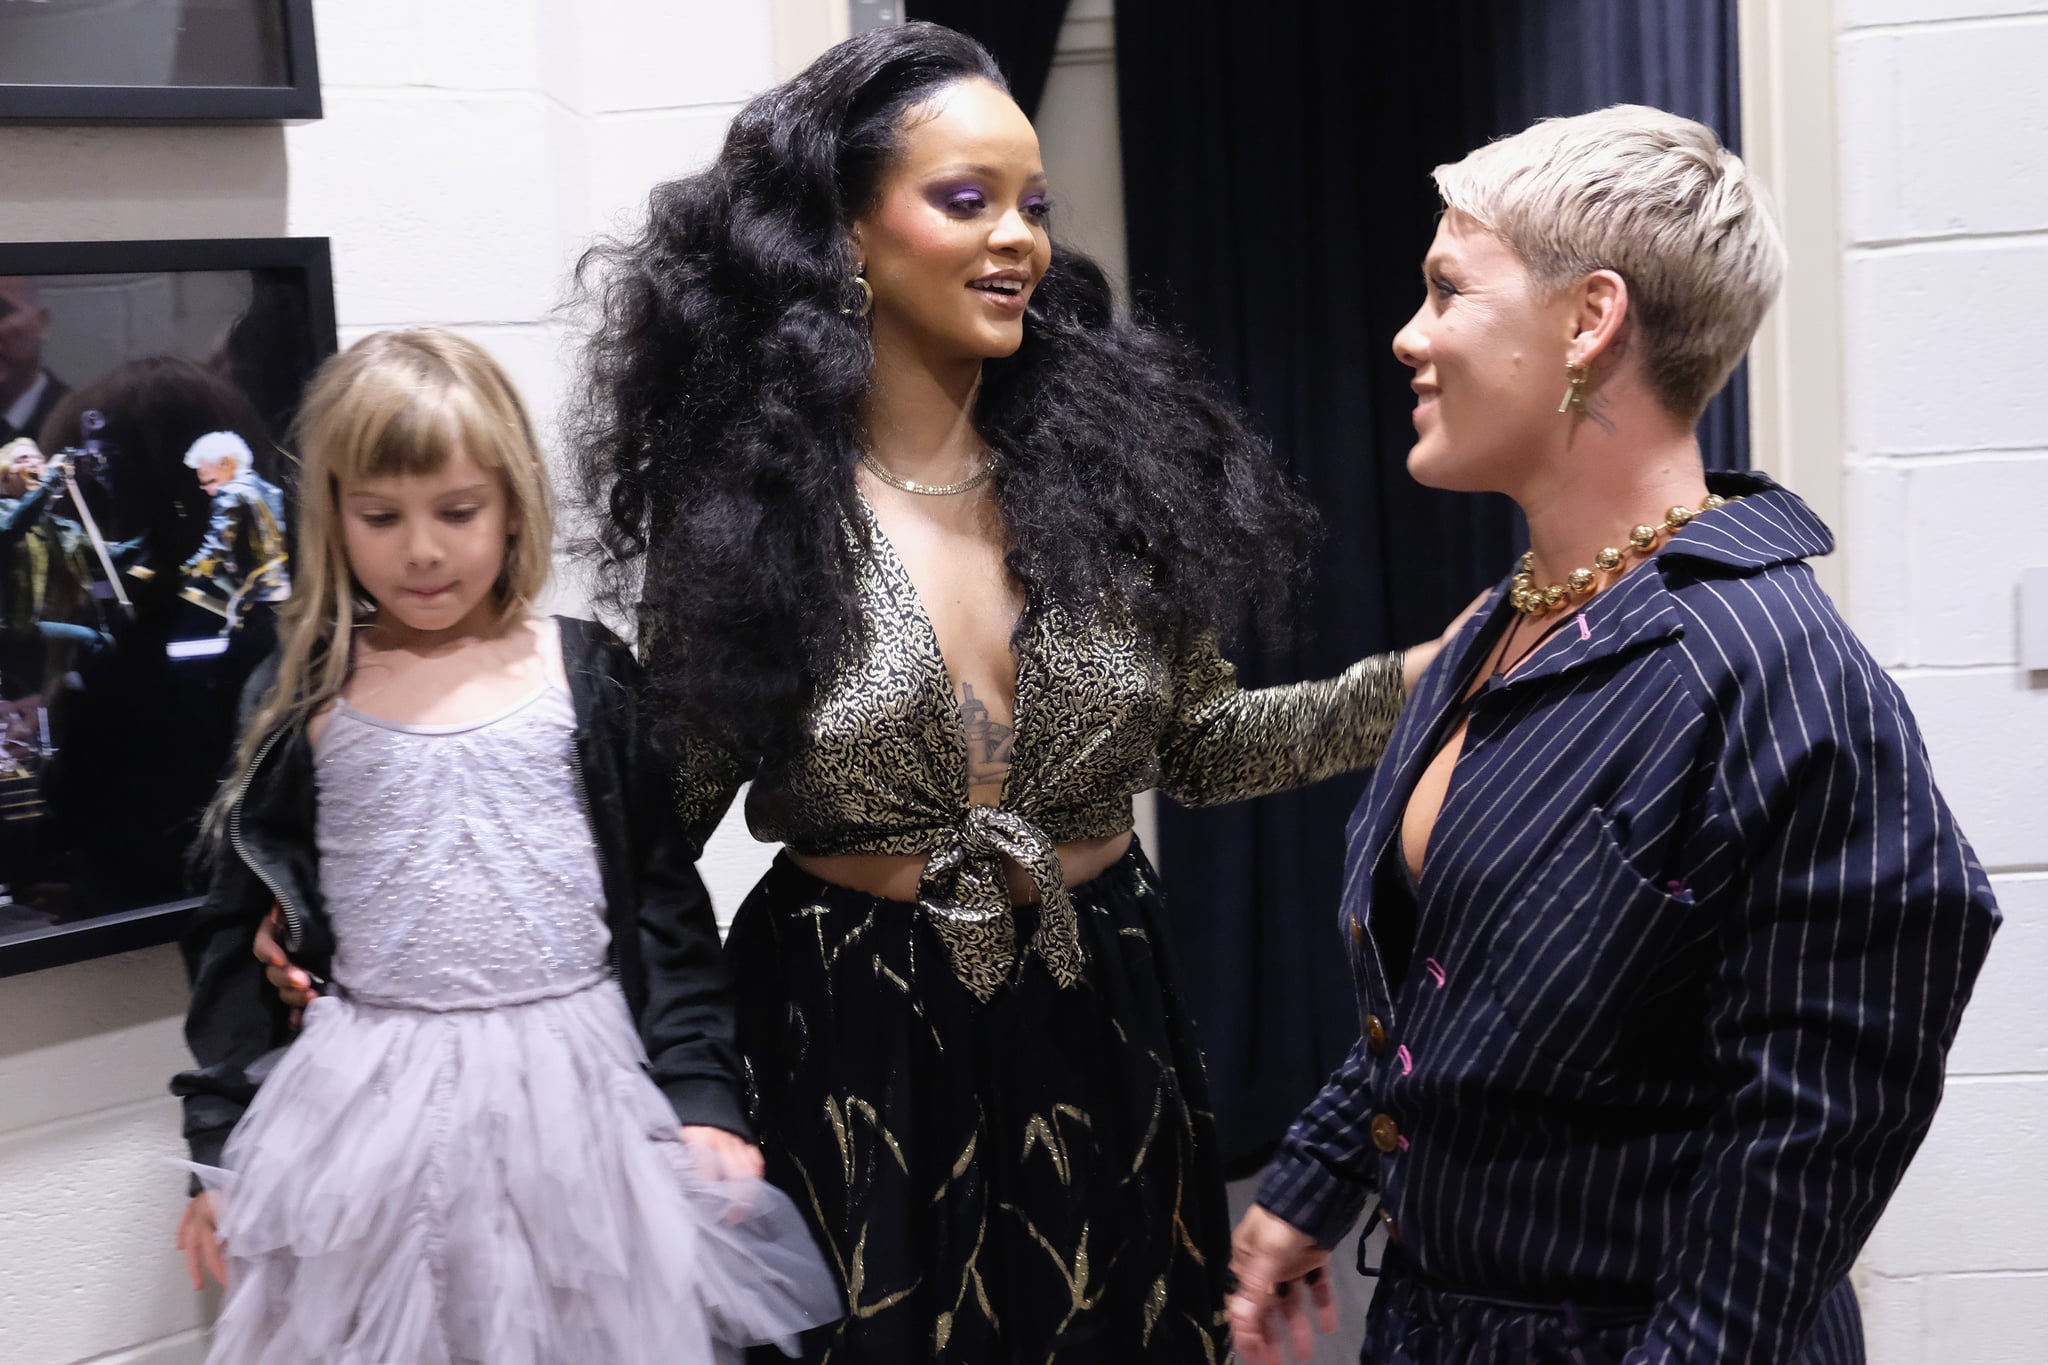 Rihanna hung out backstage with Pink and her daughter, Willow Hart, in 2018.